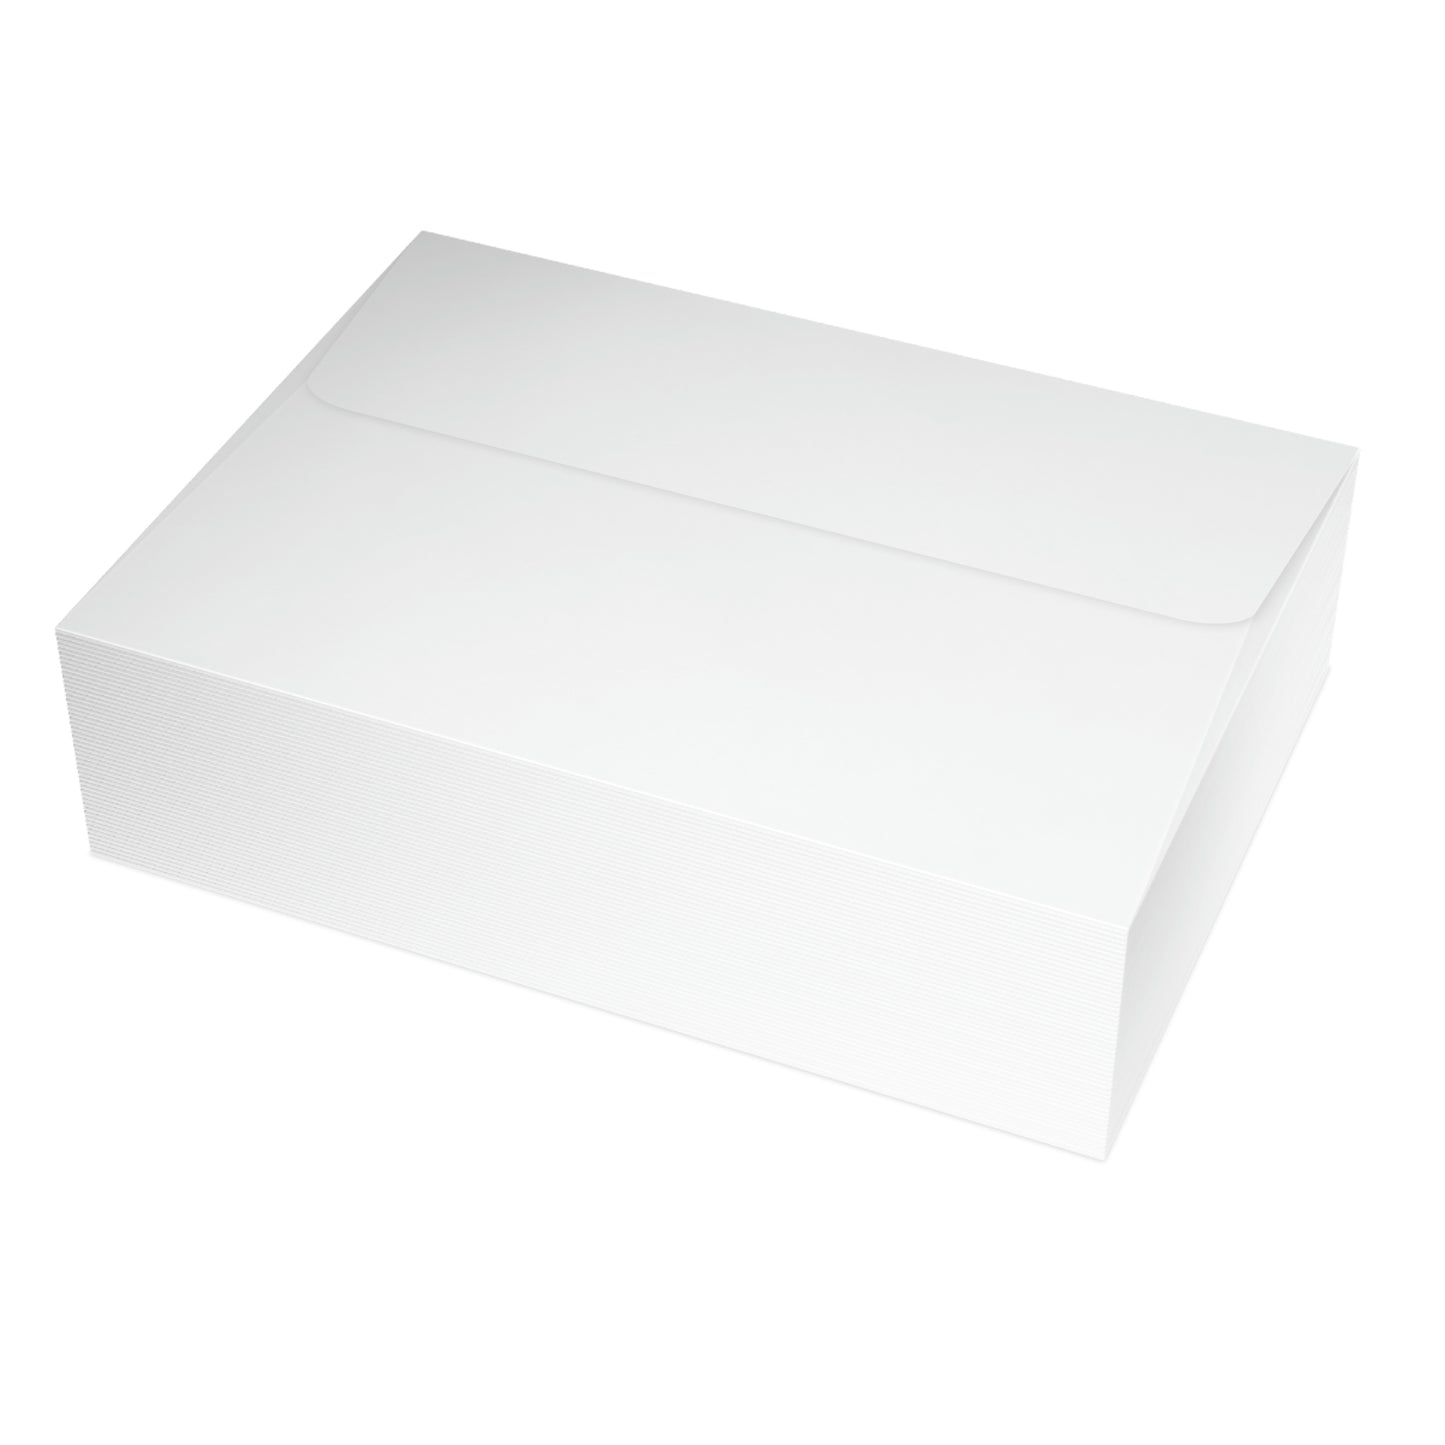 Folded Greeting Cards Horizontal (1, 10, 30, and 50pcs) Stay Focused - Design No.700